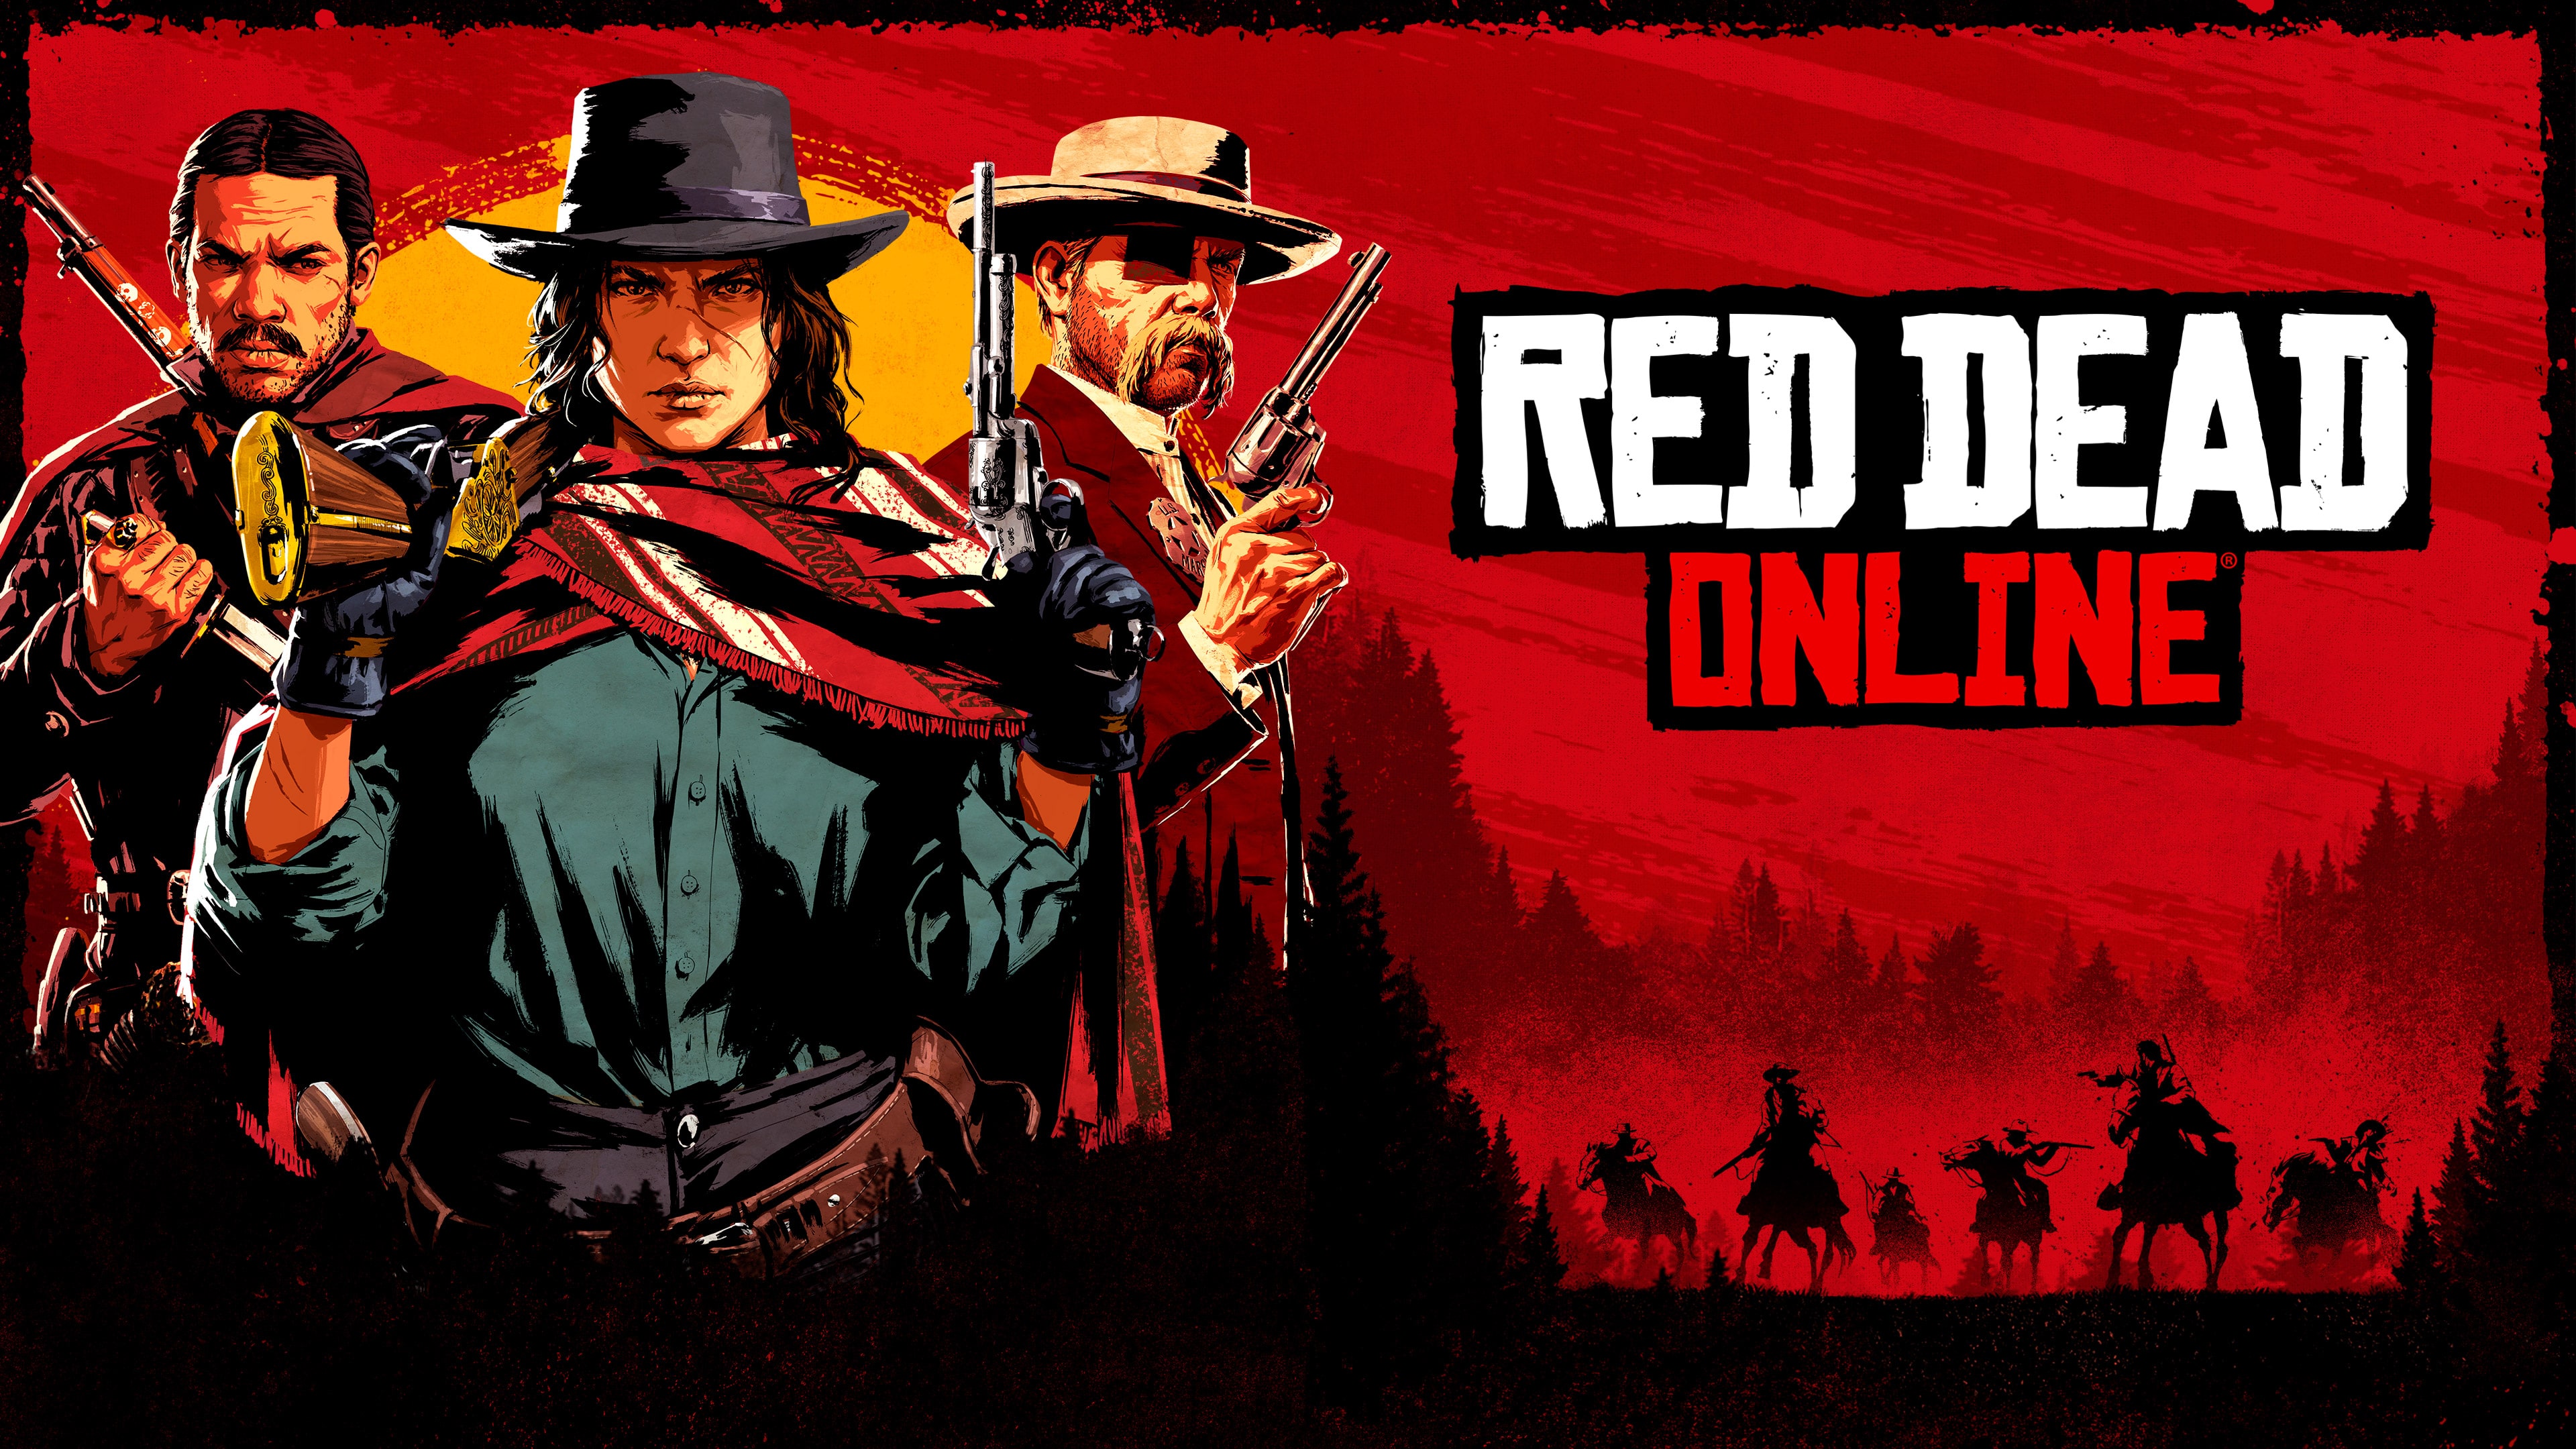 Red Dead Online (Simplified Chinese, English, Korean, Traditional Chinese)